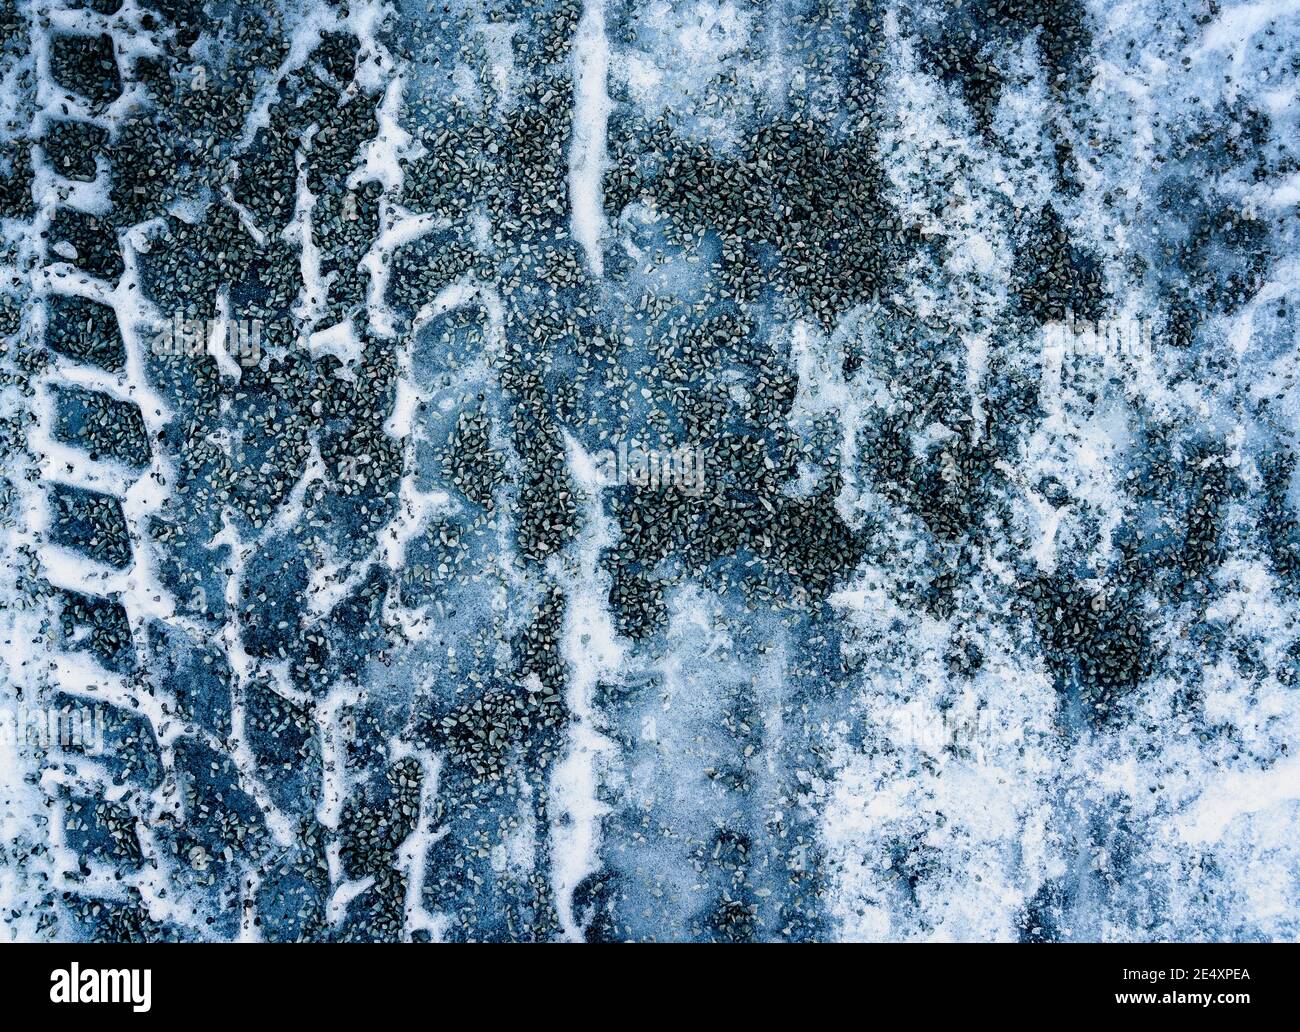 Close up of gravel strewn on an icy road with tire marks. Stock Photo